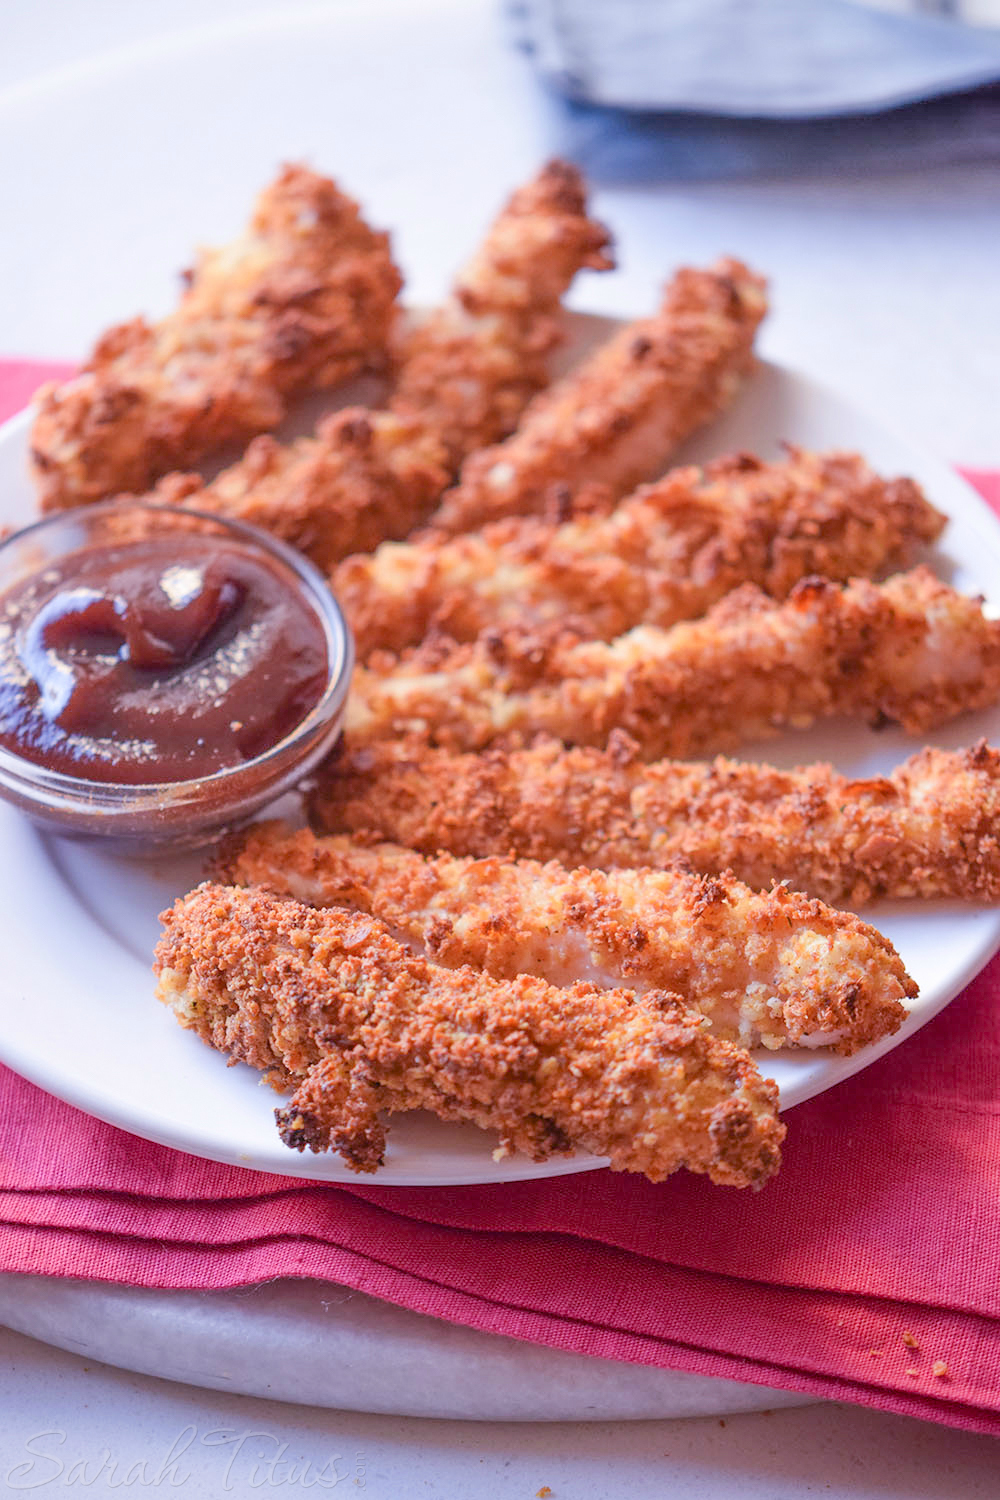 Delicious looking baked chicken tenders on a white plate with a dipping sauce on the side